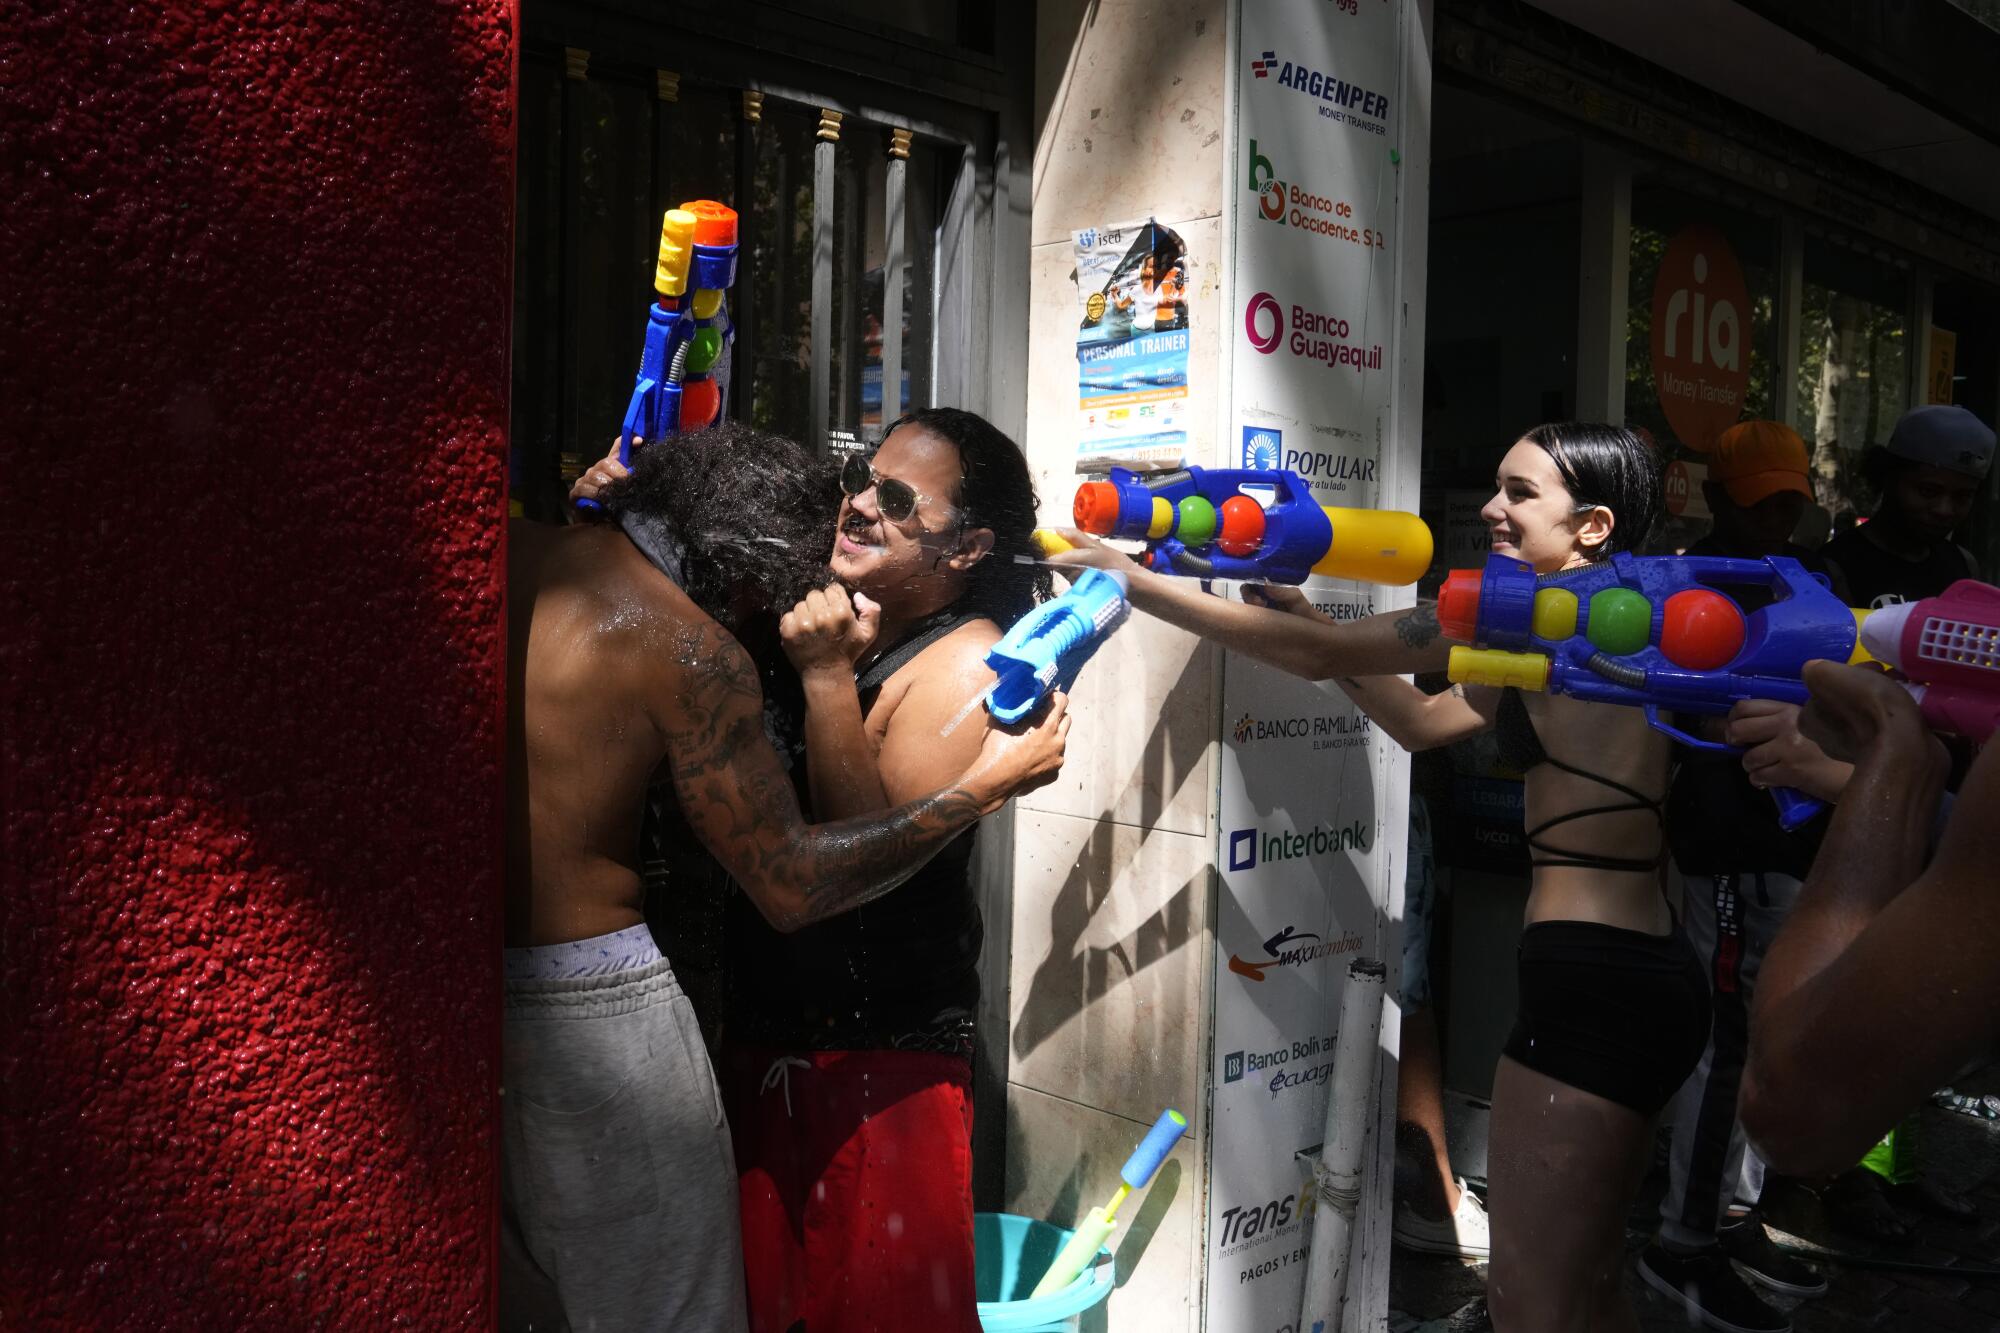 Two men shelter in a doorway as others spray water pistols during a water fight